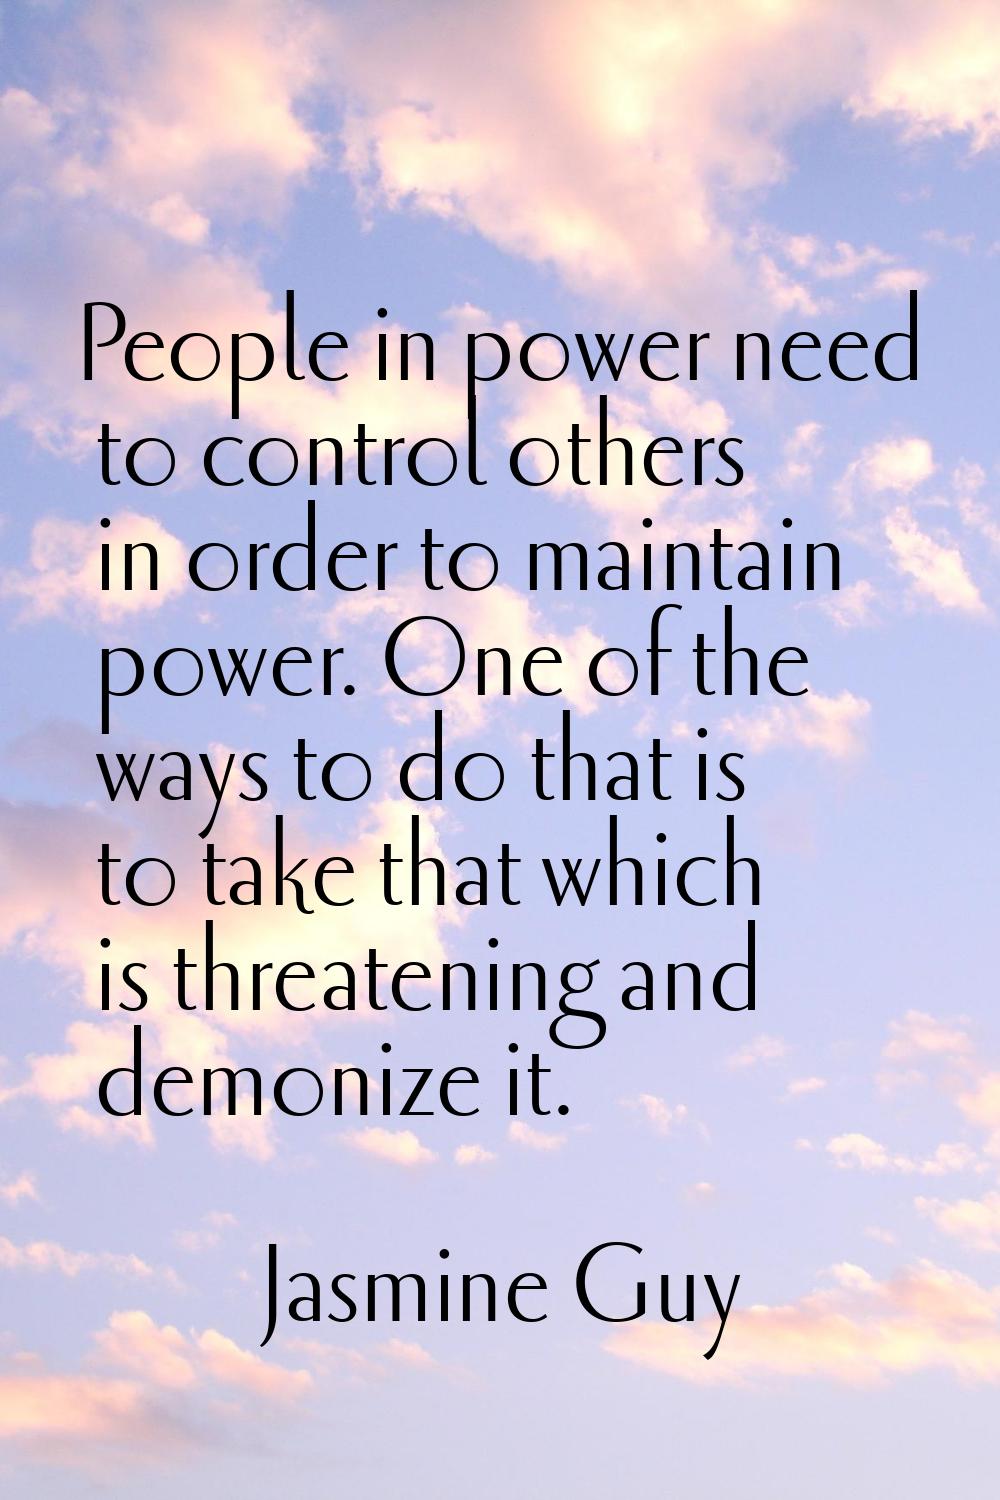 People in power need to control others in order to maintain power. One of the ways to do that is to